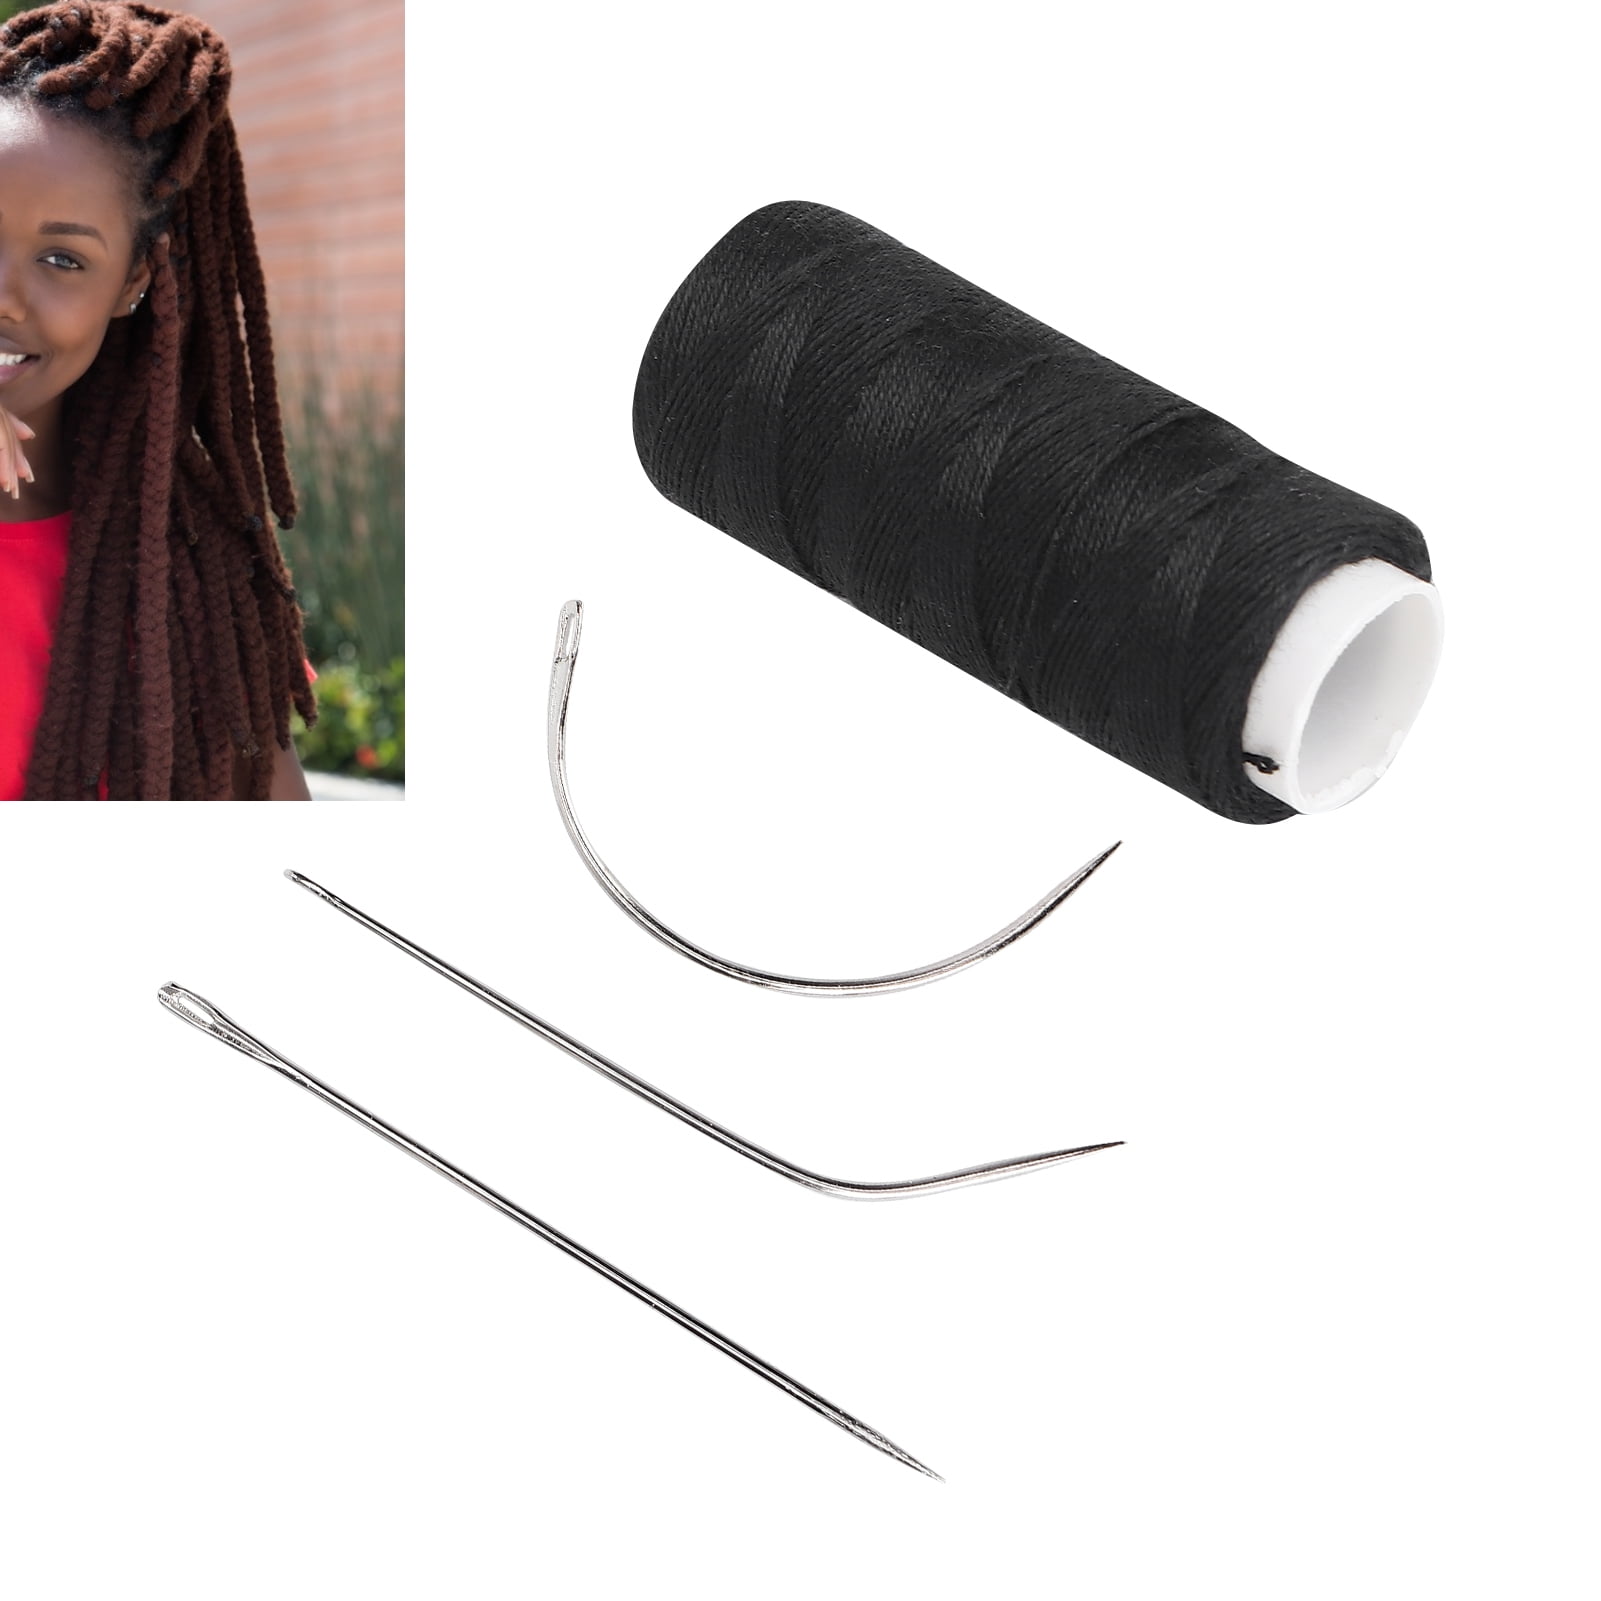  Esffaci 40PCS Hair Weave Needle And Thread Set Black Hair  Weft Sewing Thread And Wig T Pins C Curved Needles Kit For Wig Making  Blocking Knitting Modelling And Crafts